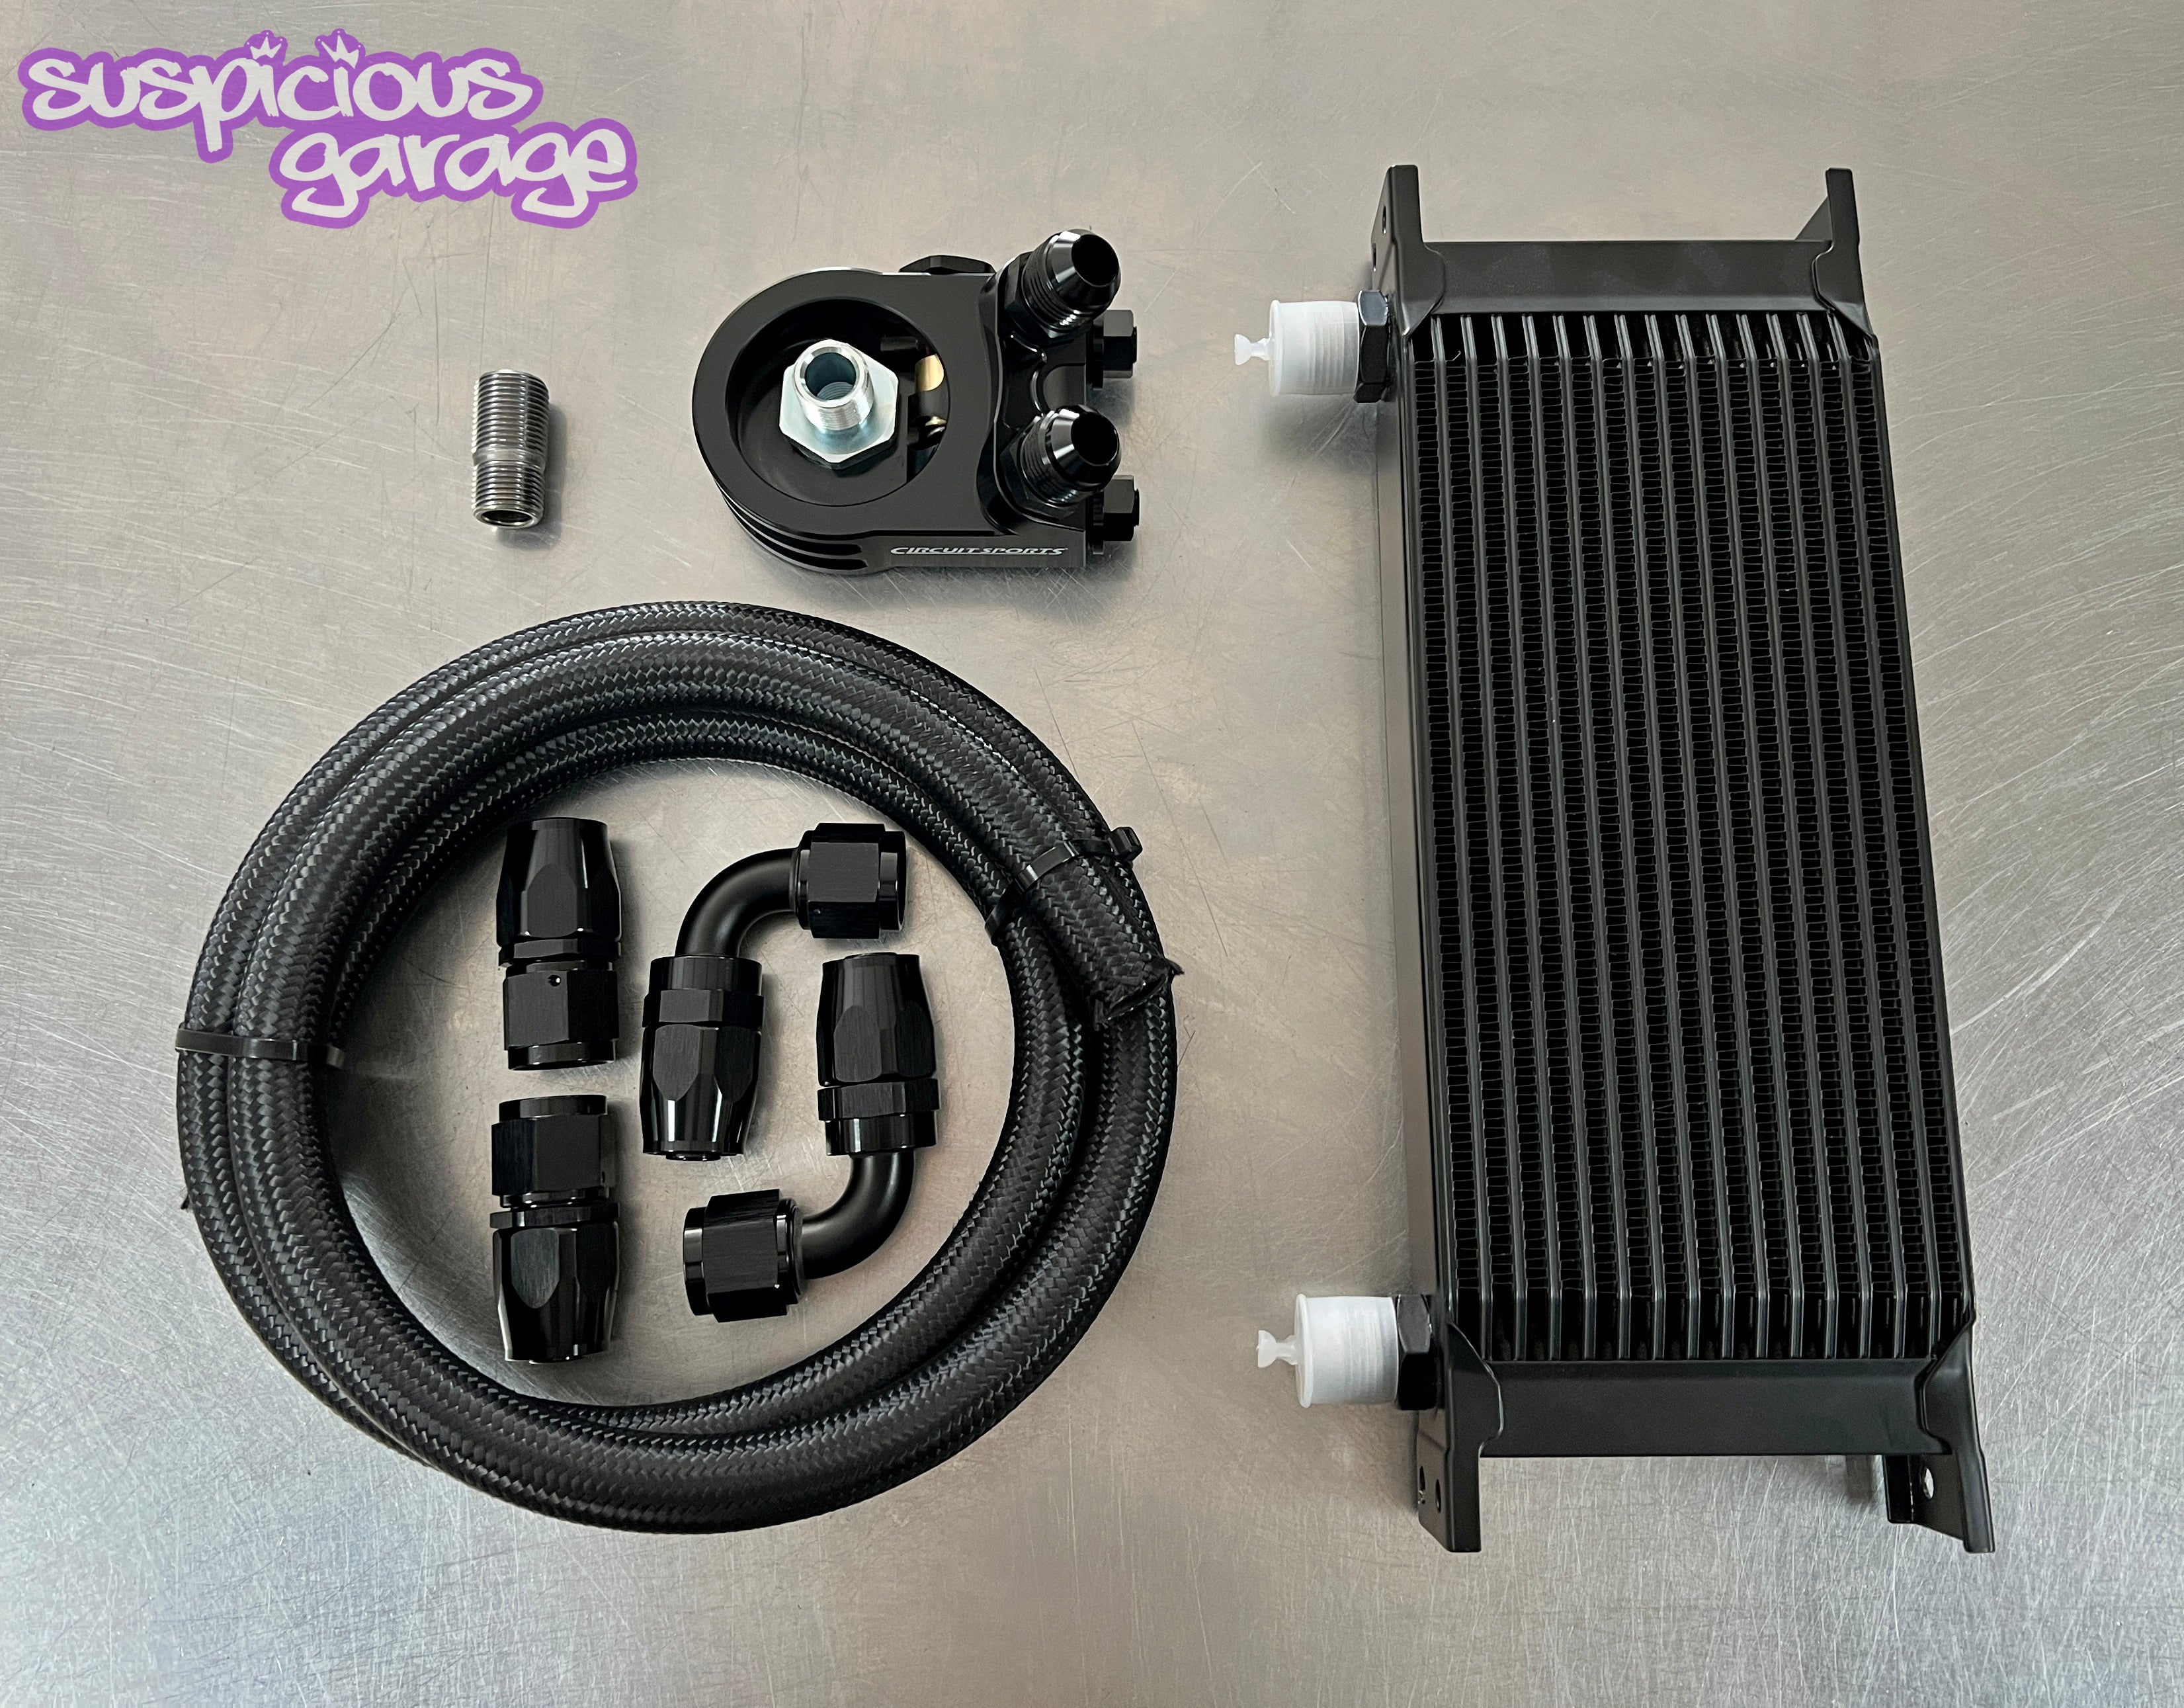 Suspicious Garage Nissan Rb25 S1 S2 Neo Thermostatic Oil Cooler Kit